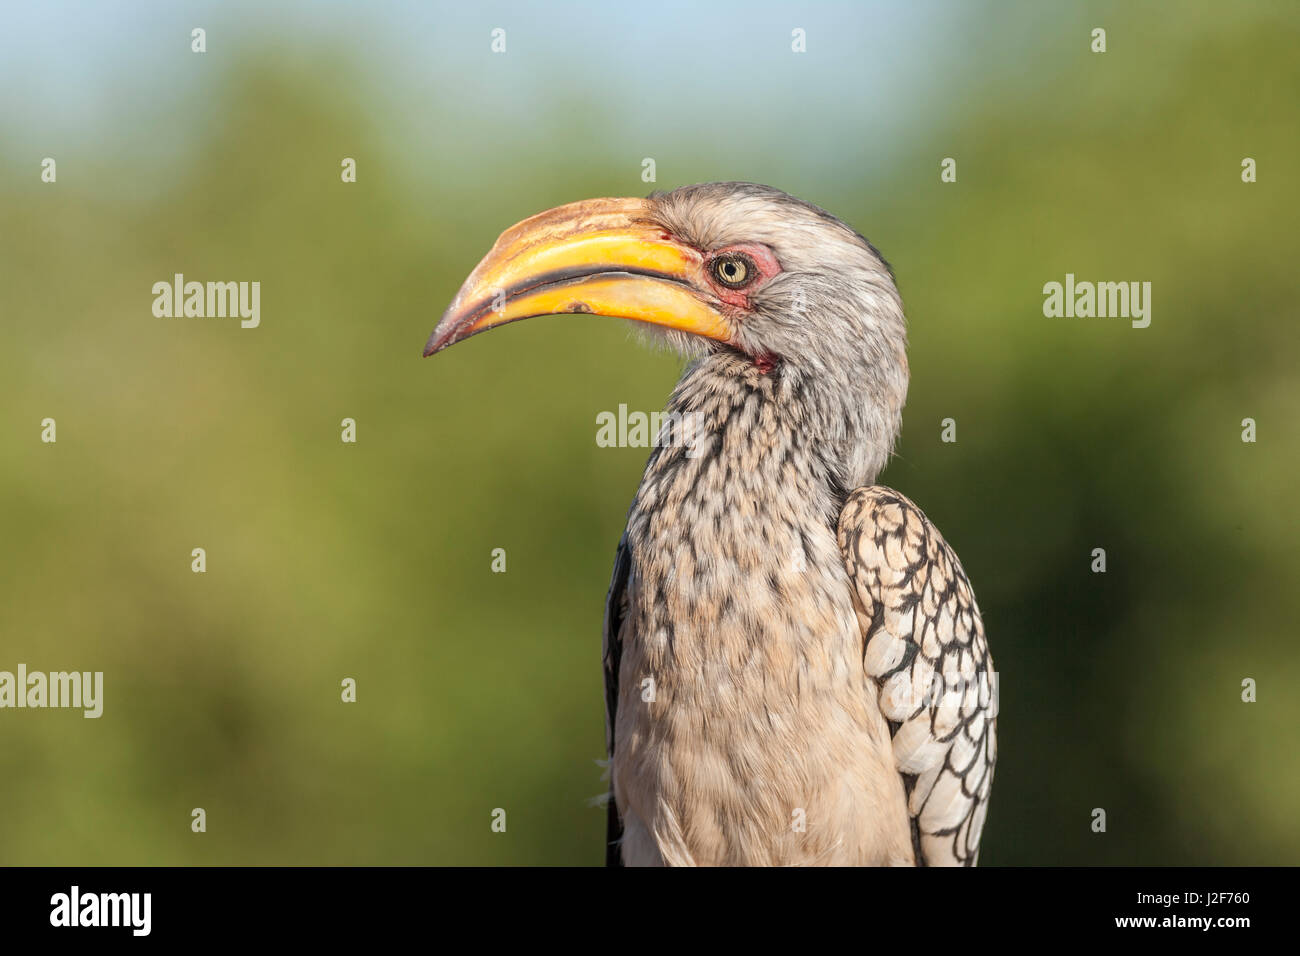 Portrait of a Yellow-billed Hornbill against green background Stock Photo